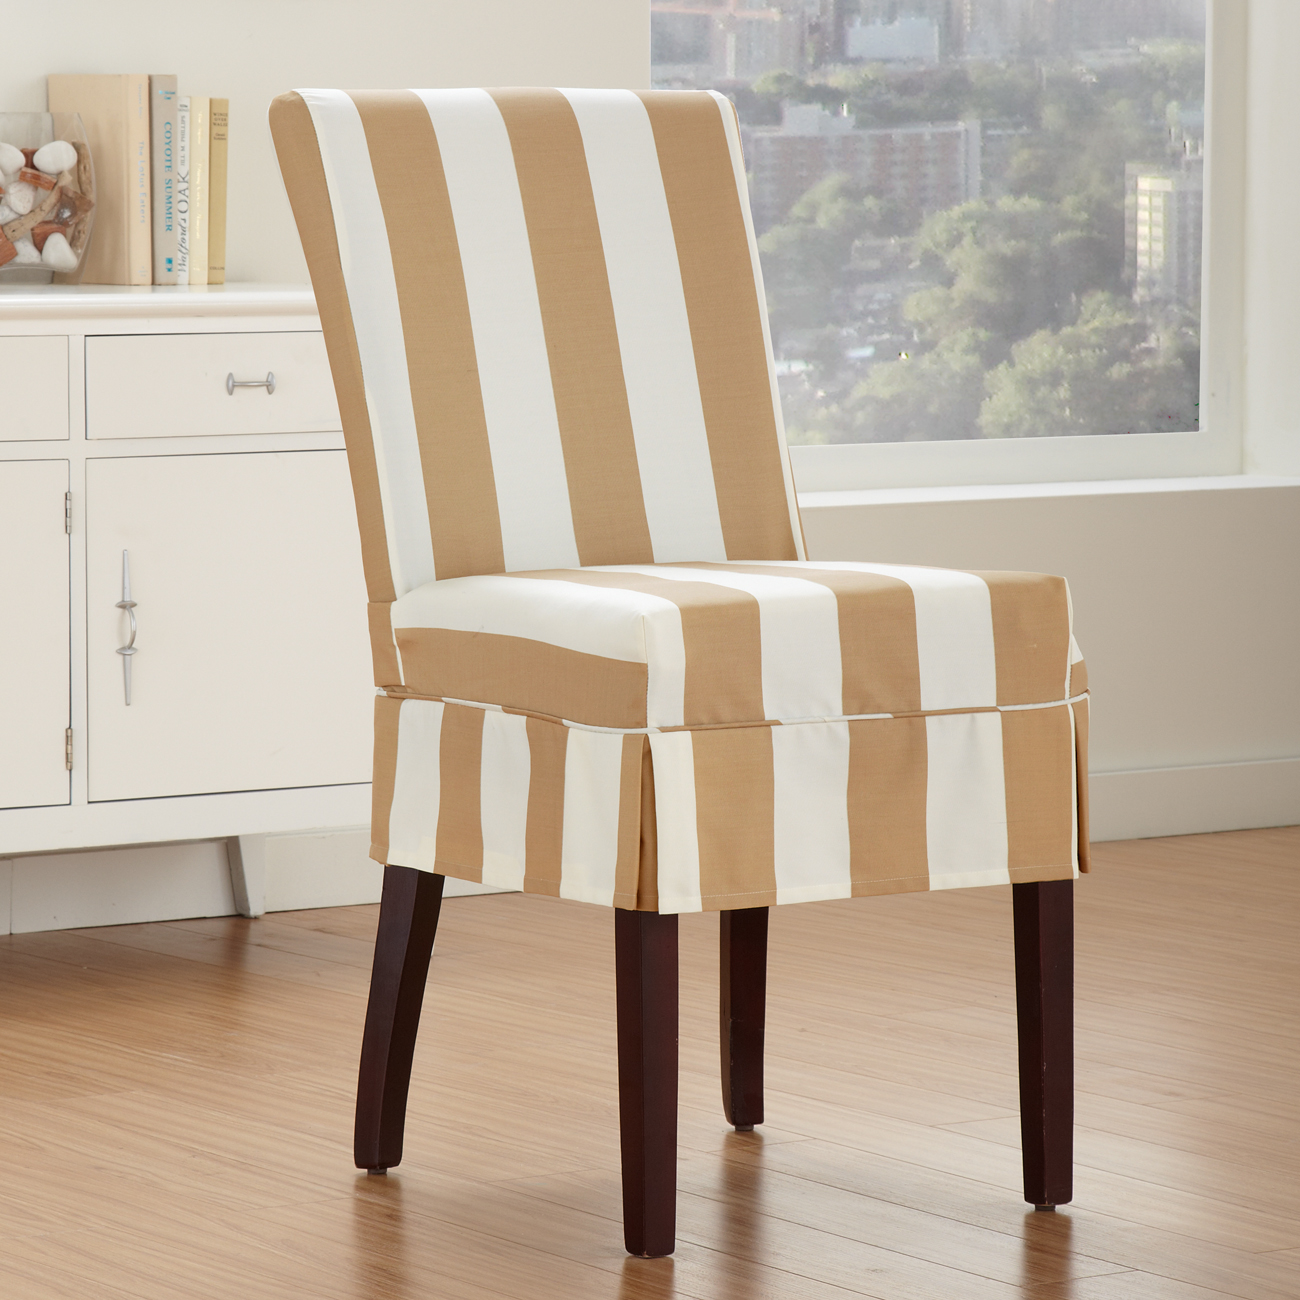 slipcovers dining chairs photo - 2